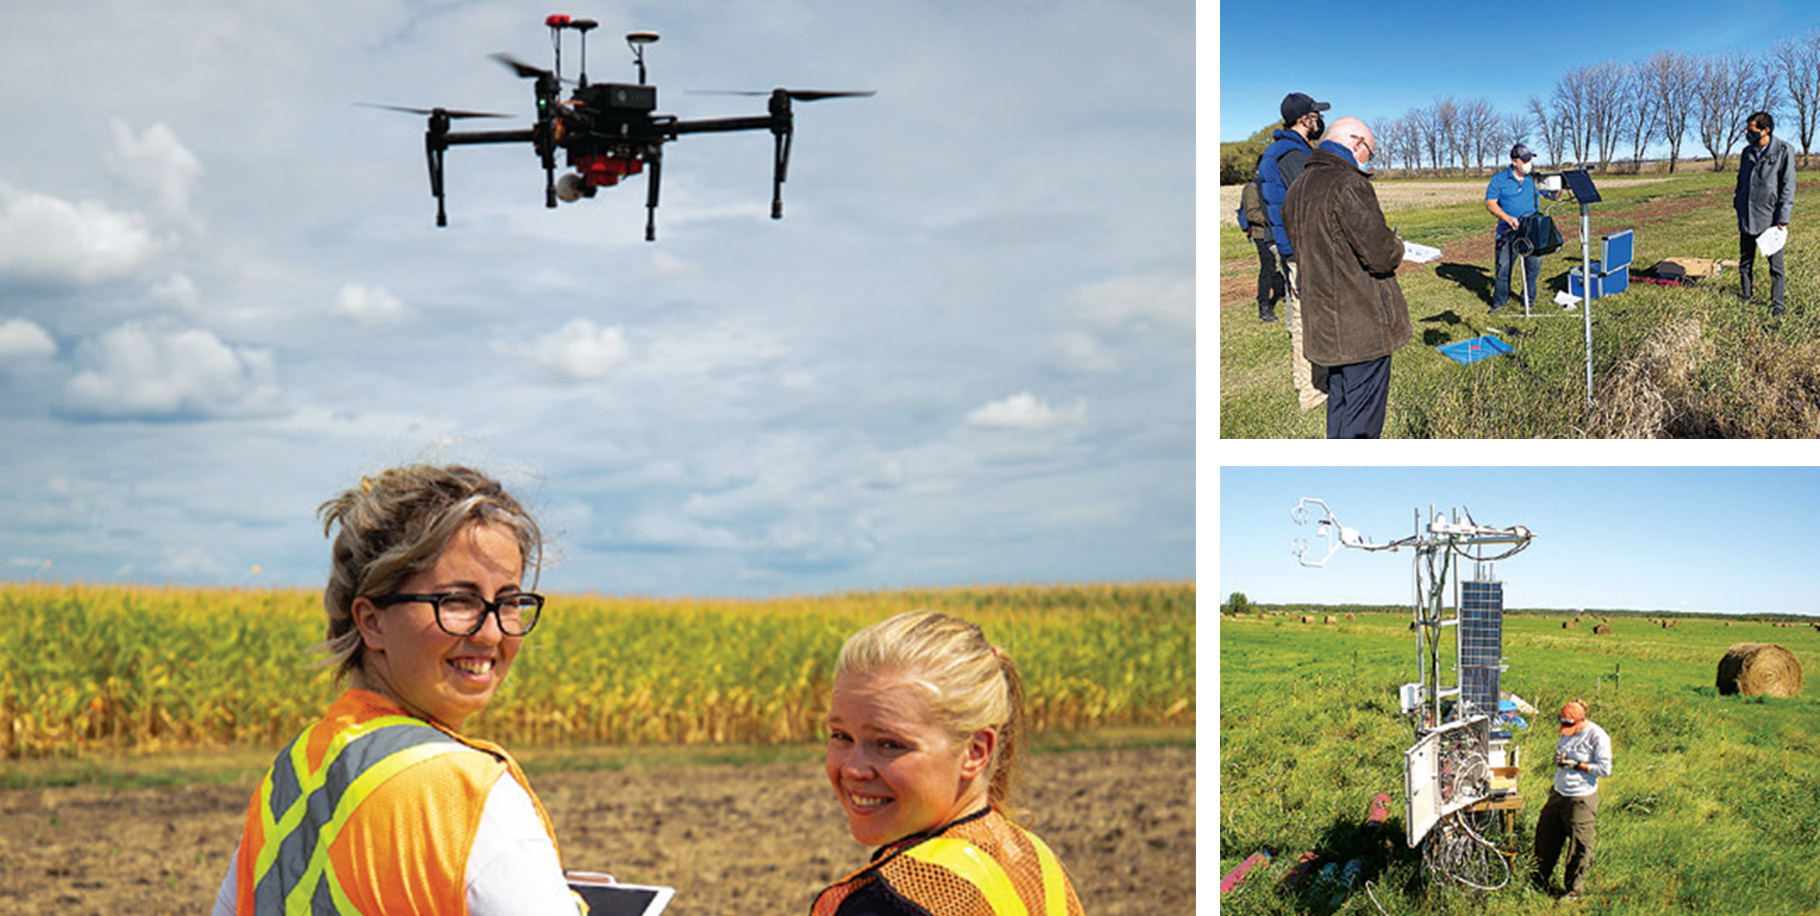 A collage of three photographs of two young women operating a drone in a field, farmers surrounding sensing equipment, and a man next to a large piece of equipment in a meadow.